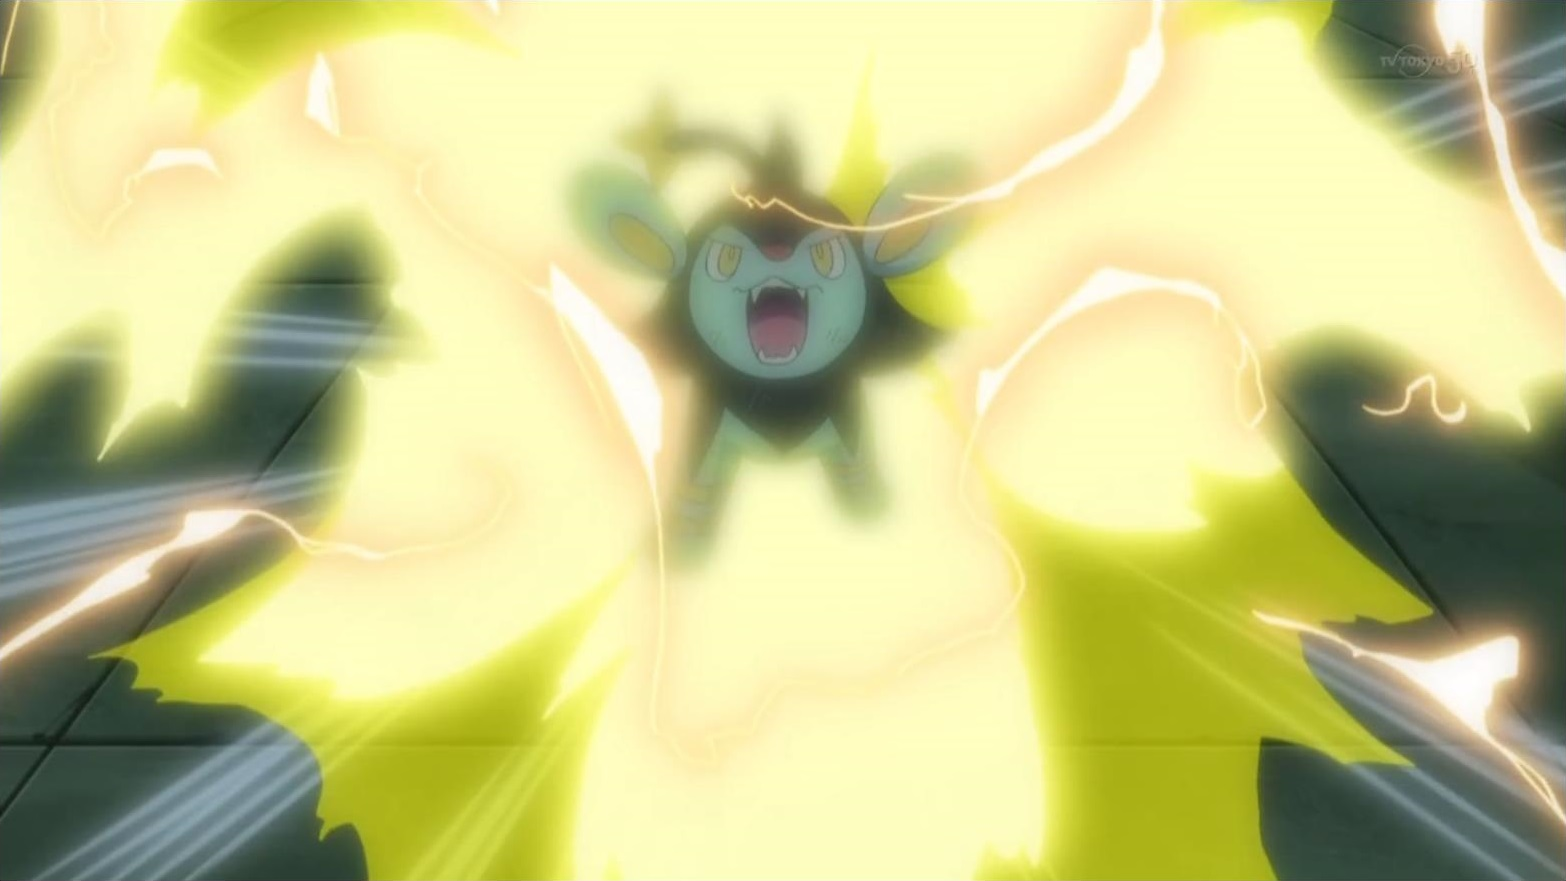 http://vignette3.wikia.nocookie.net/pokemon/images/b/b2/Clemont's_Luxio_Discharge.png/revision/